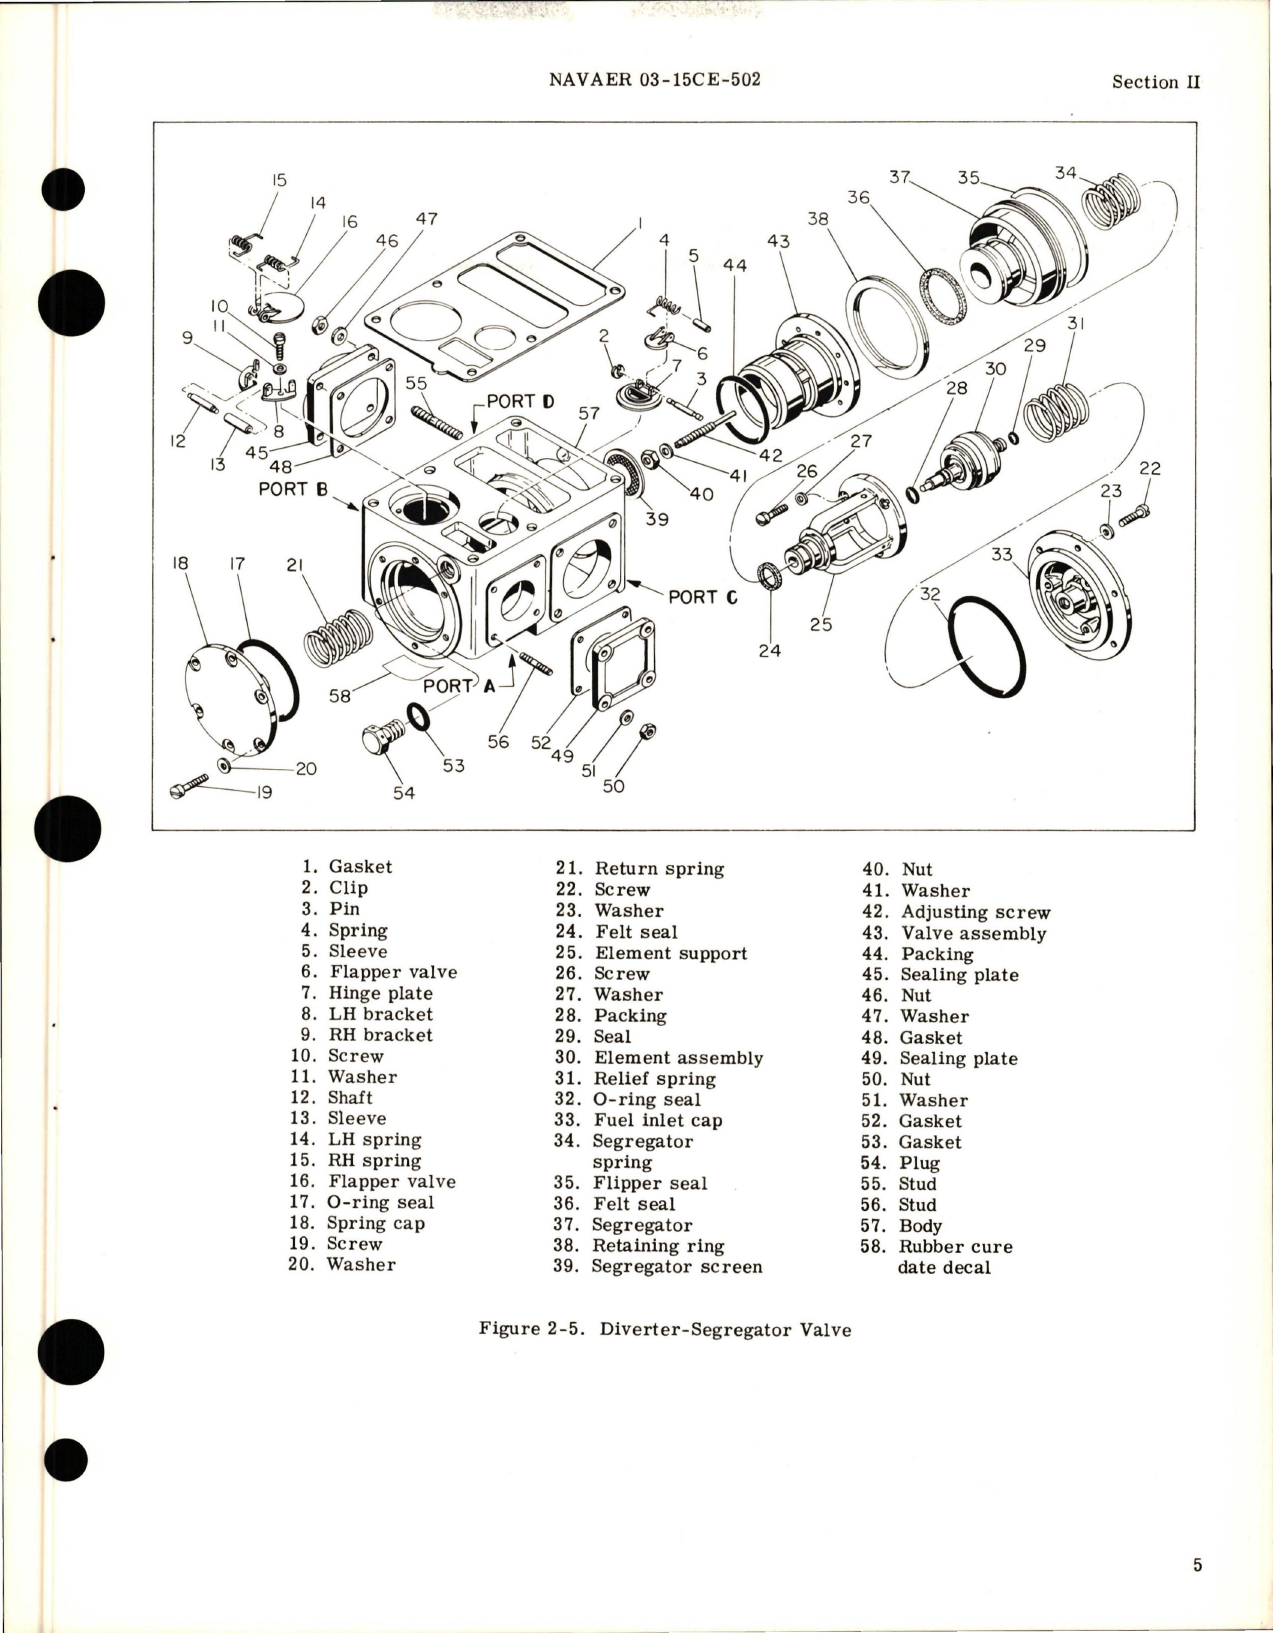 Sample page 9 from AirCorps Library document: Overhaul Instructions for Diverter Segregator Valve Assemblies